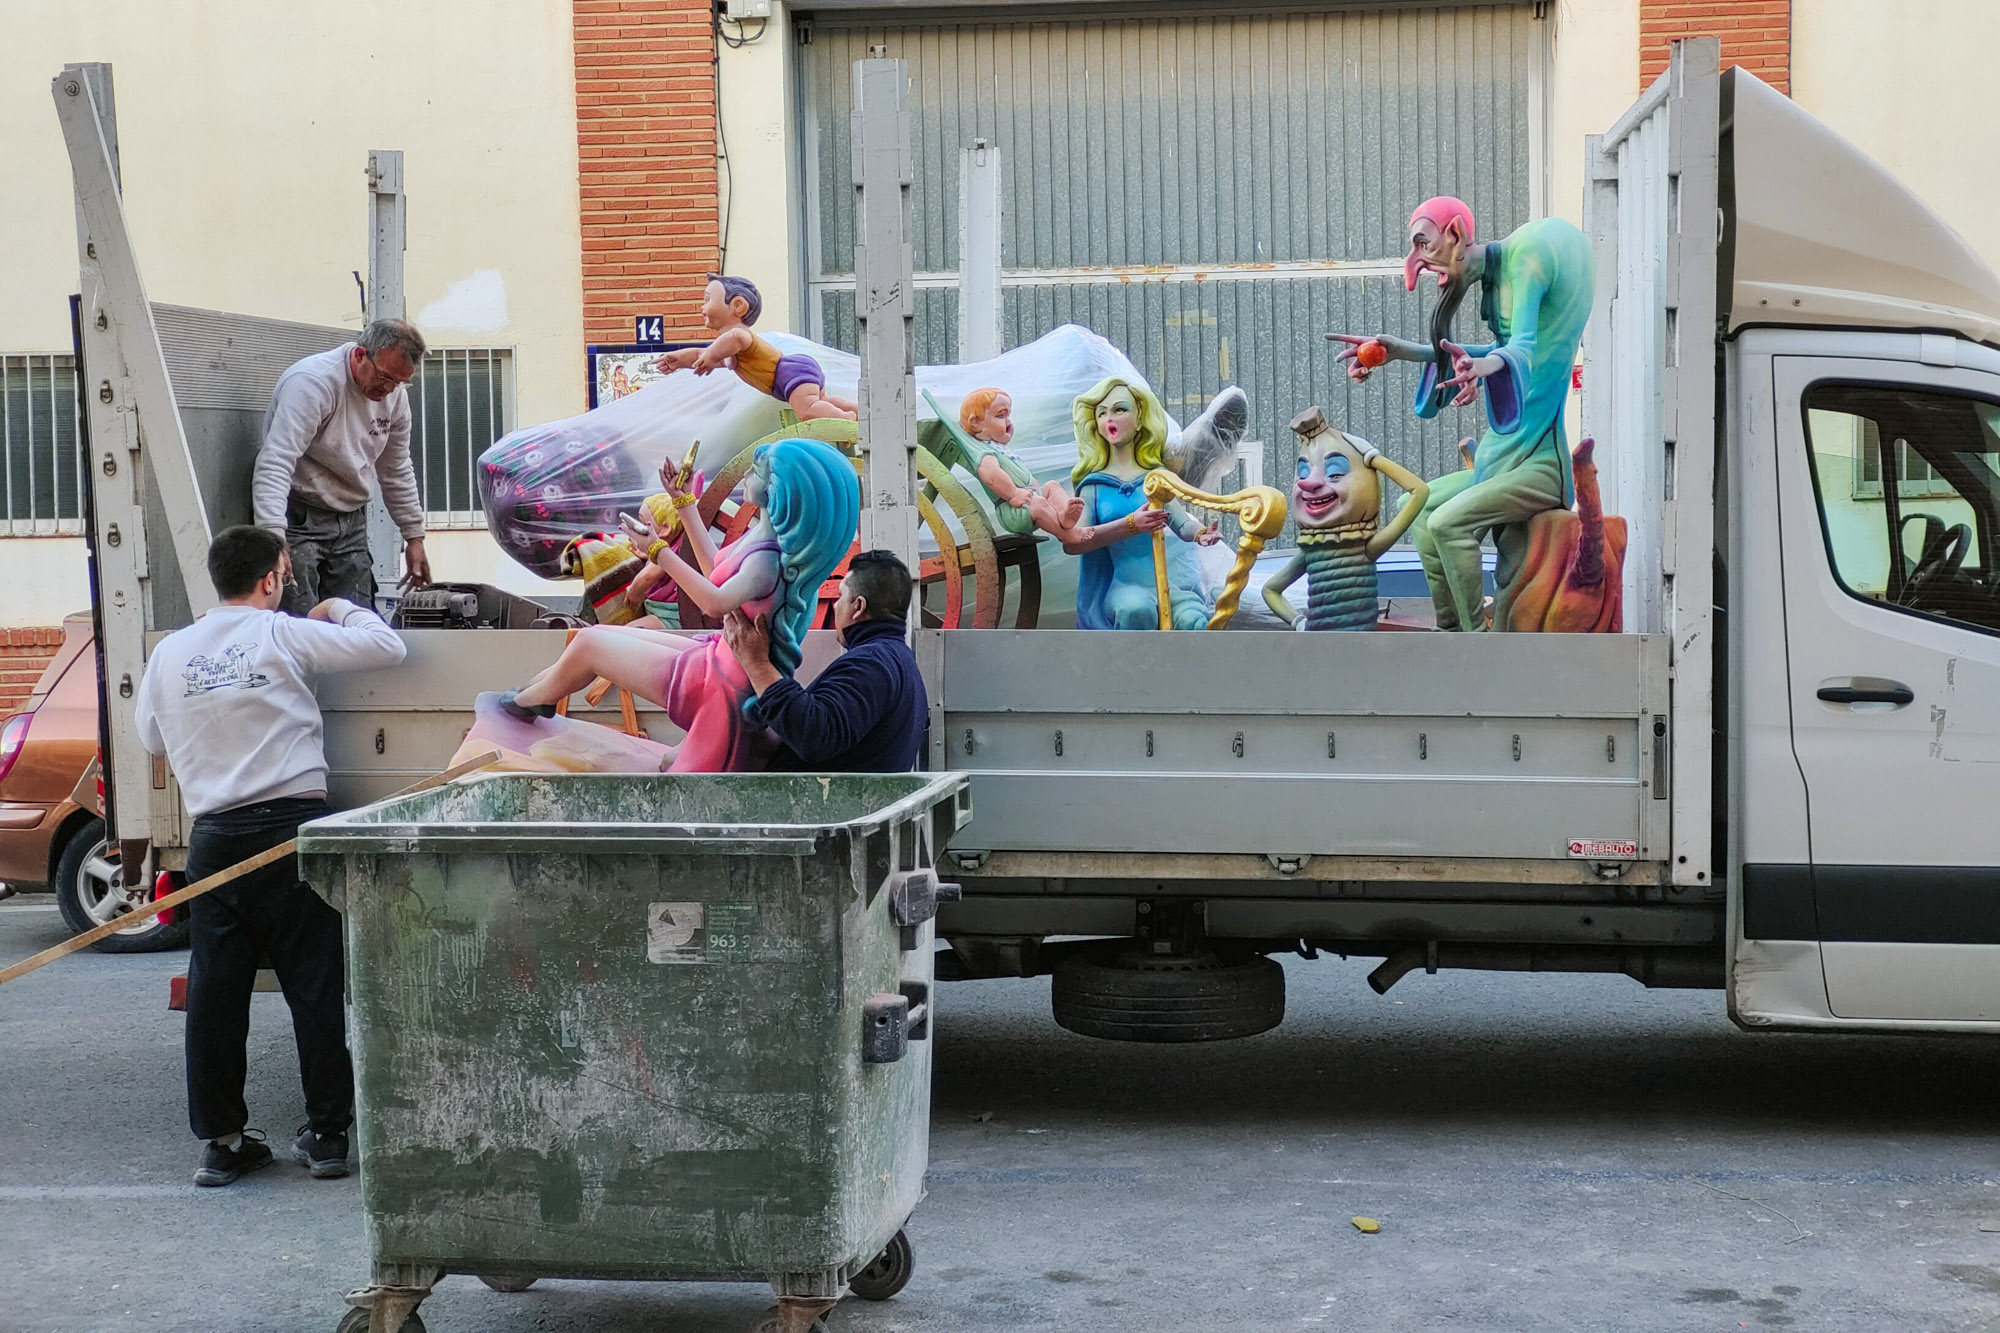 Loading up the truck with Fallas Figures